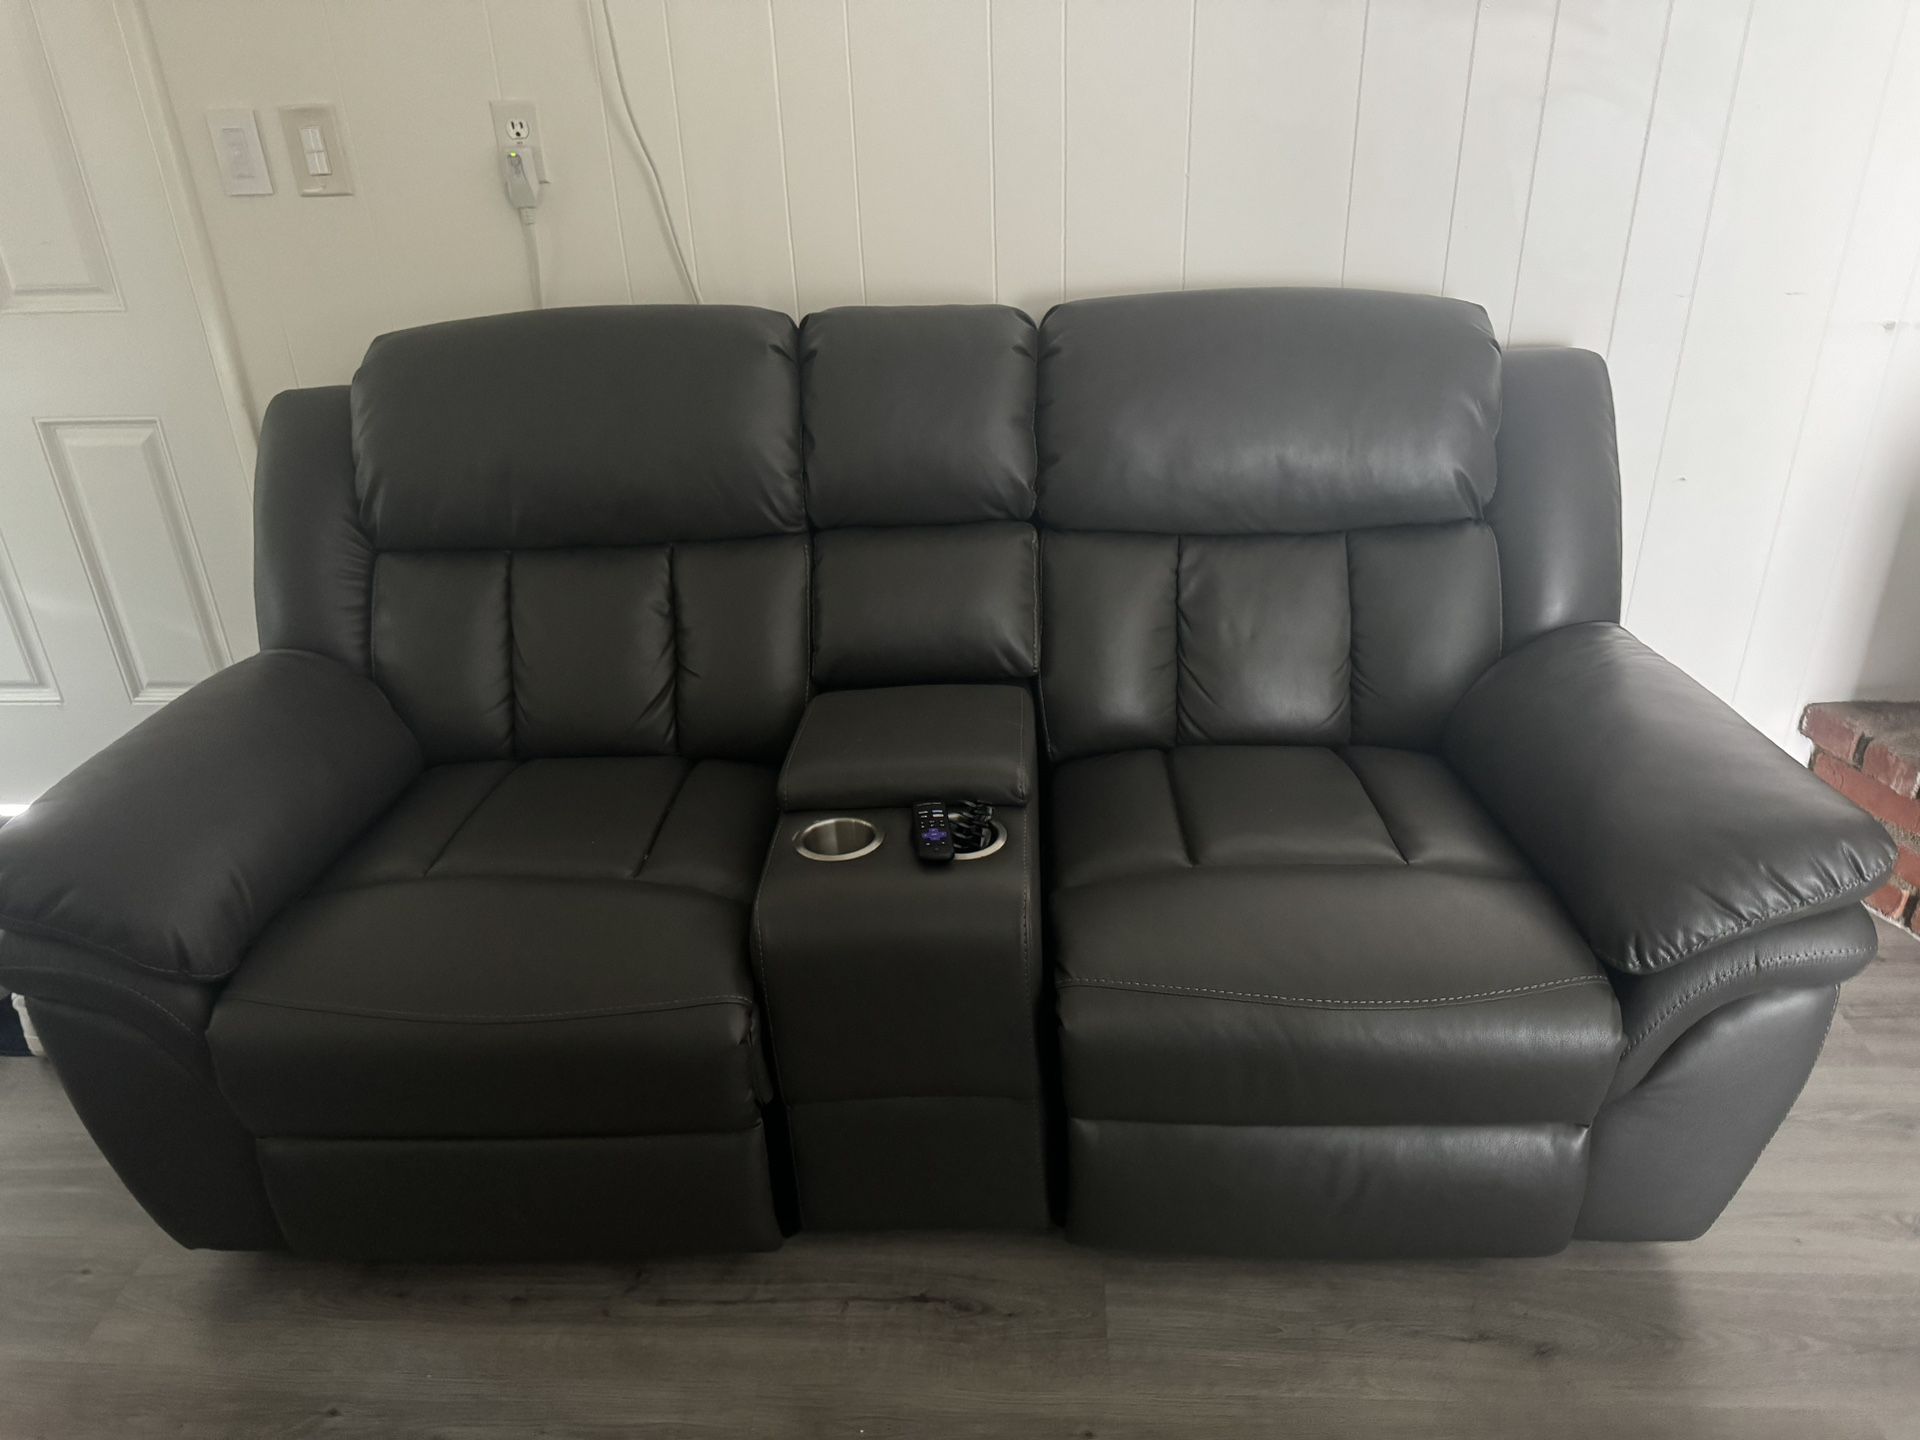 *FREE DELIVERY * Brand New Leather Recliner Couches